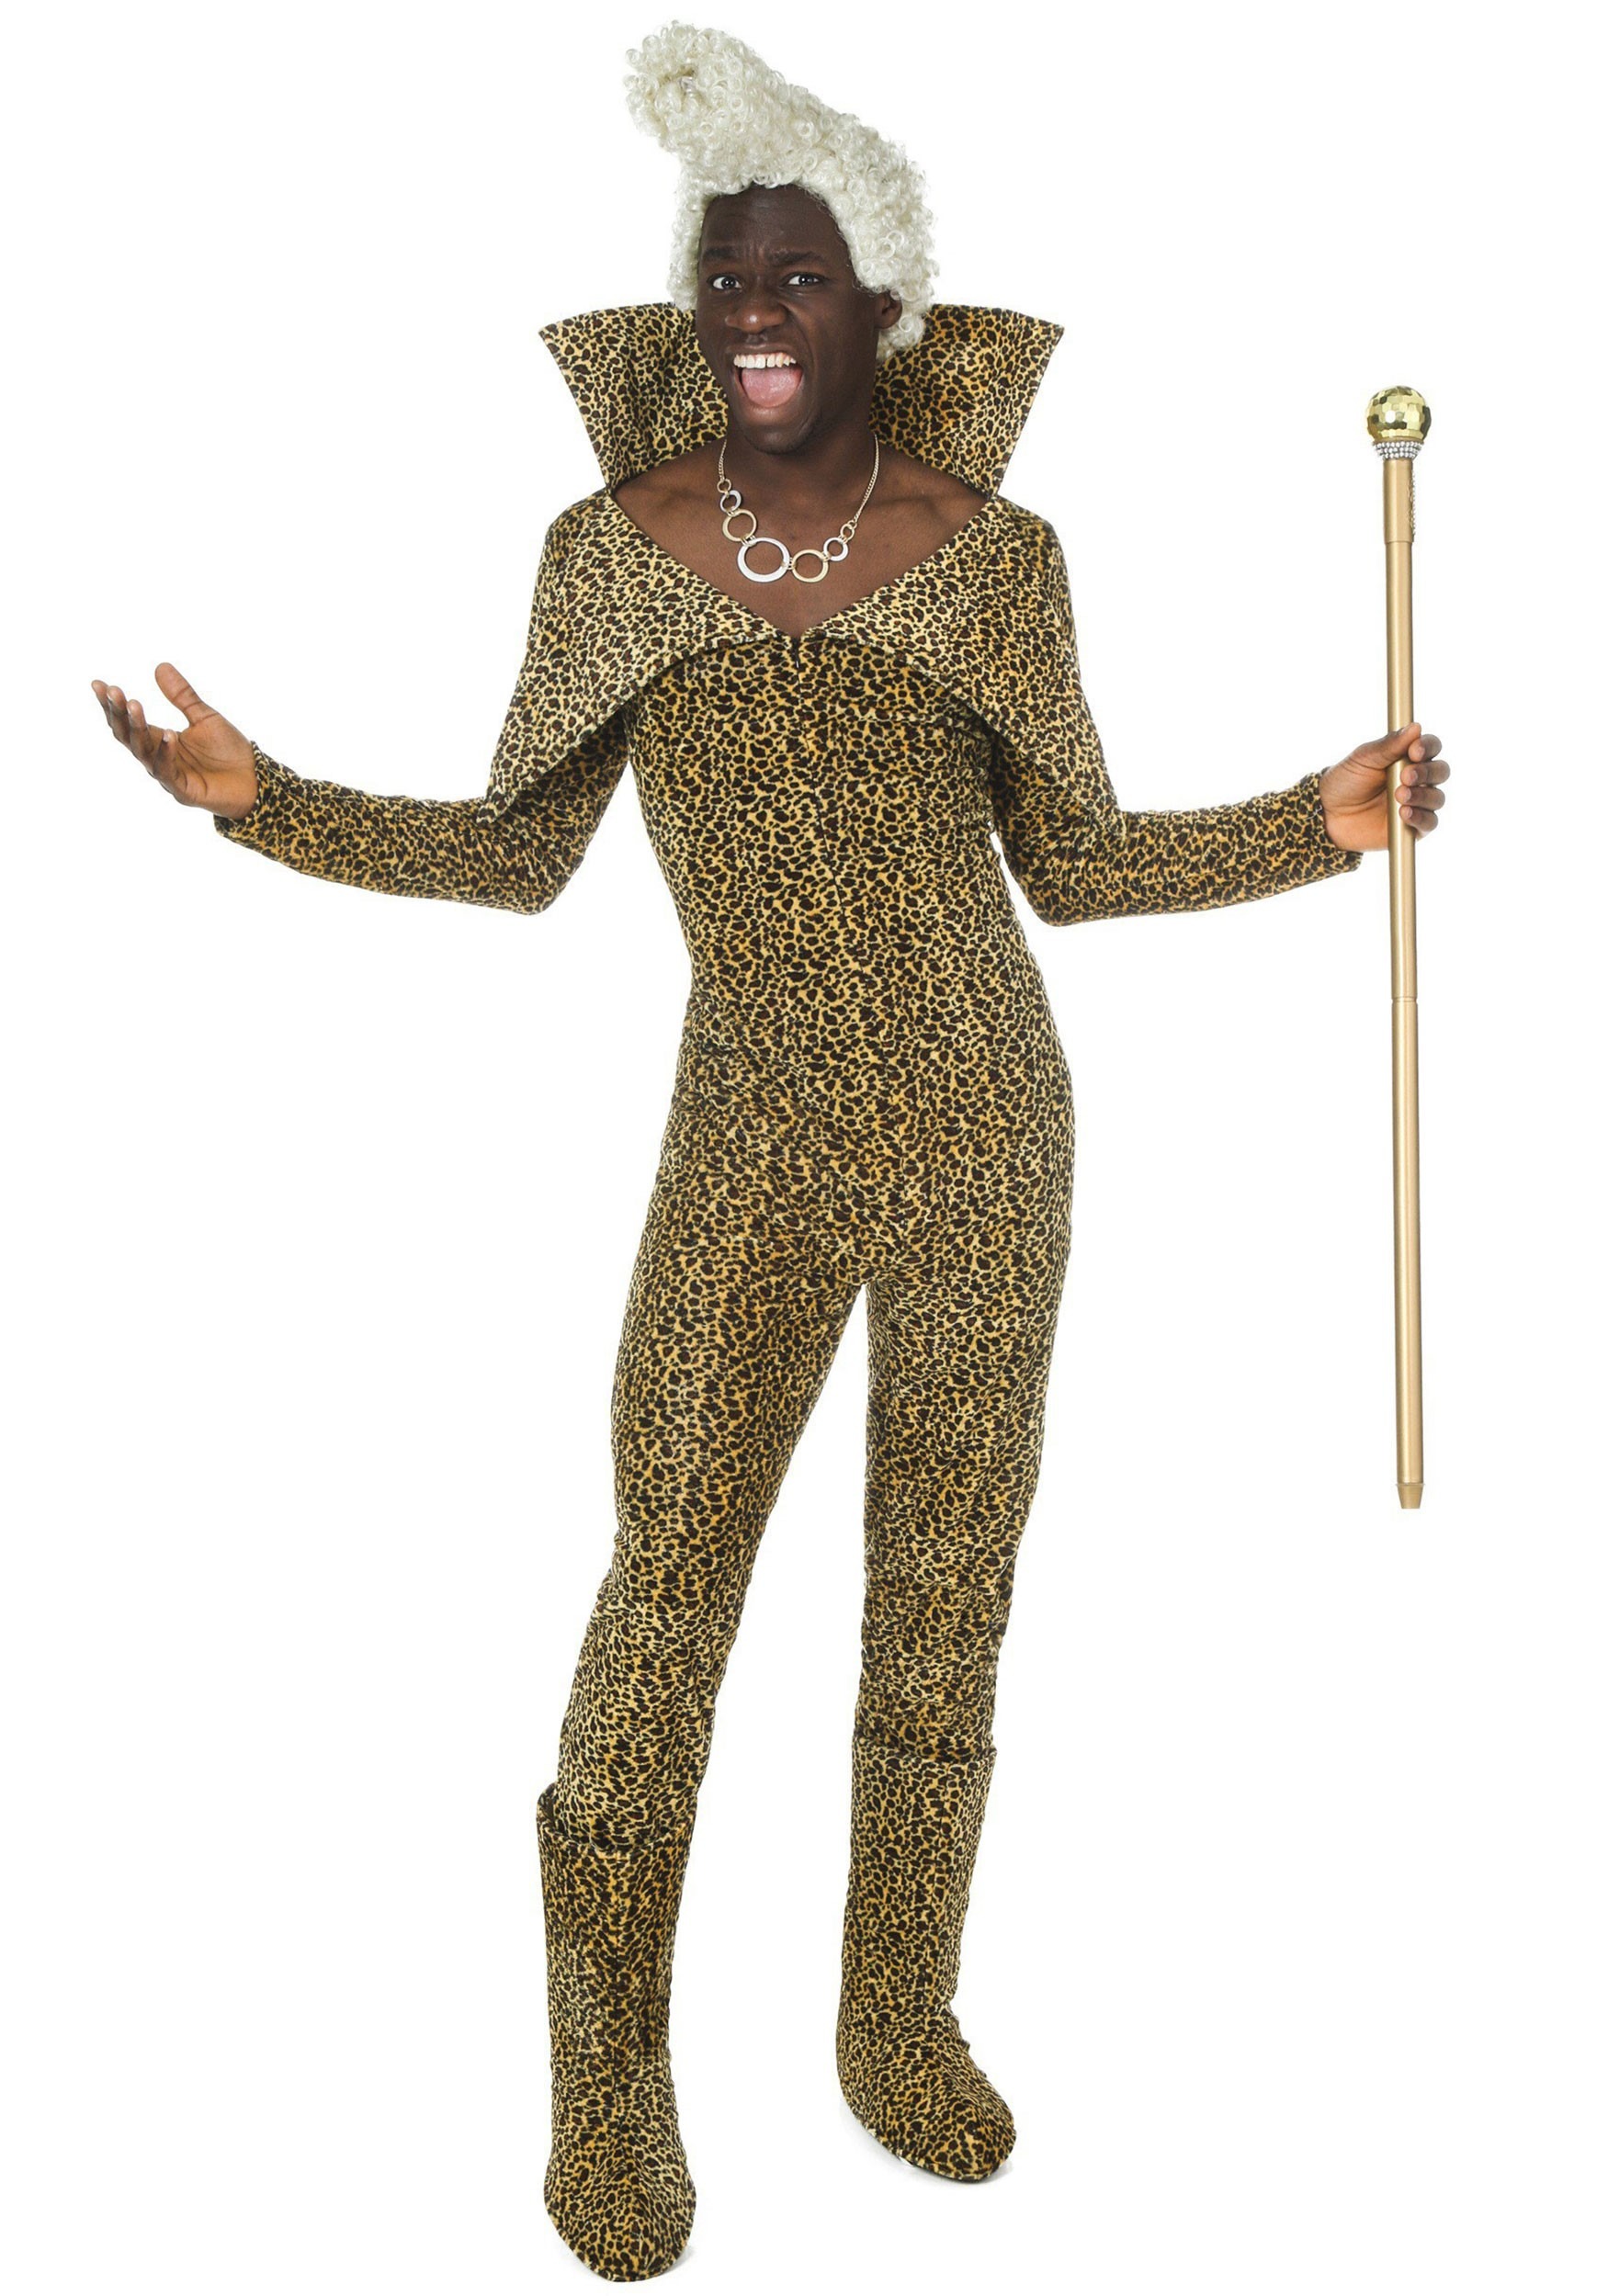 Photos - Fancy Dress Element FUN Costumes 5th  Ruby Rhod Costume for Men | Movies Costumes Black 